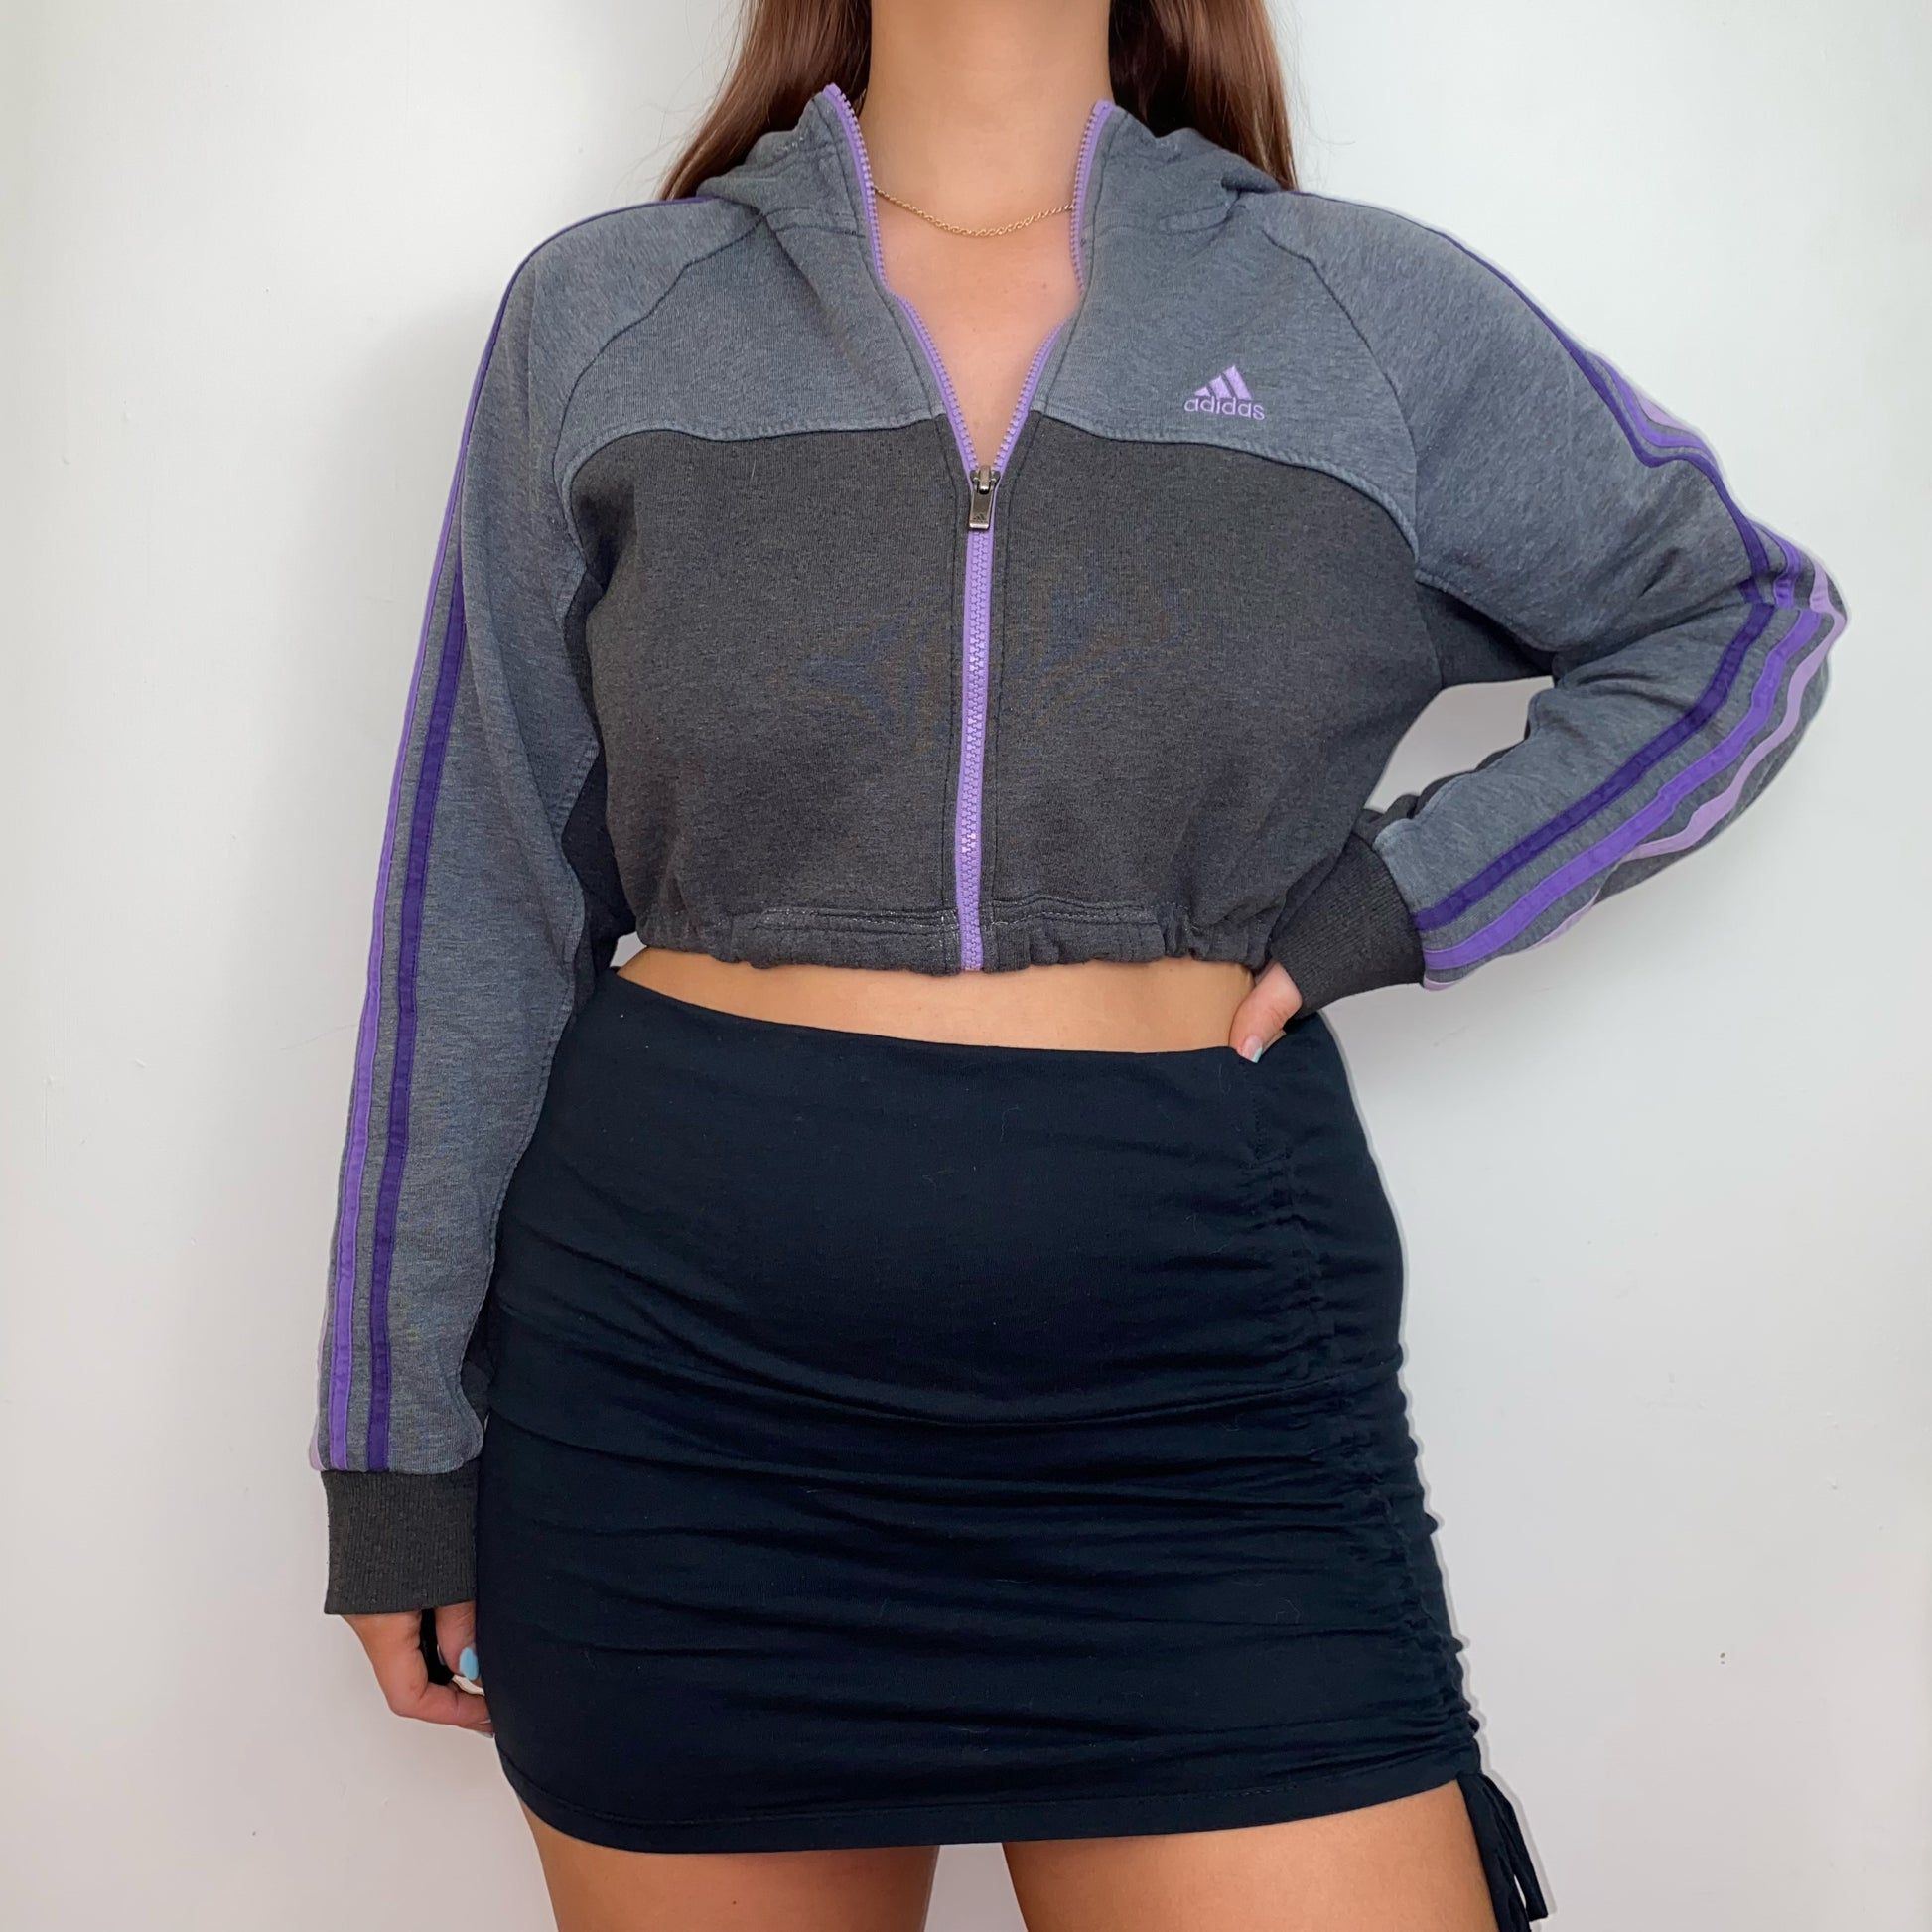 grey and purple 1/4 zip cropped hoodie with purple adidas logo shown on a model wearing a black skirt